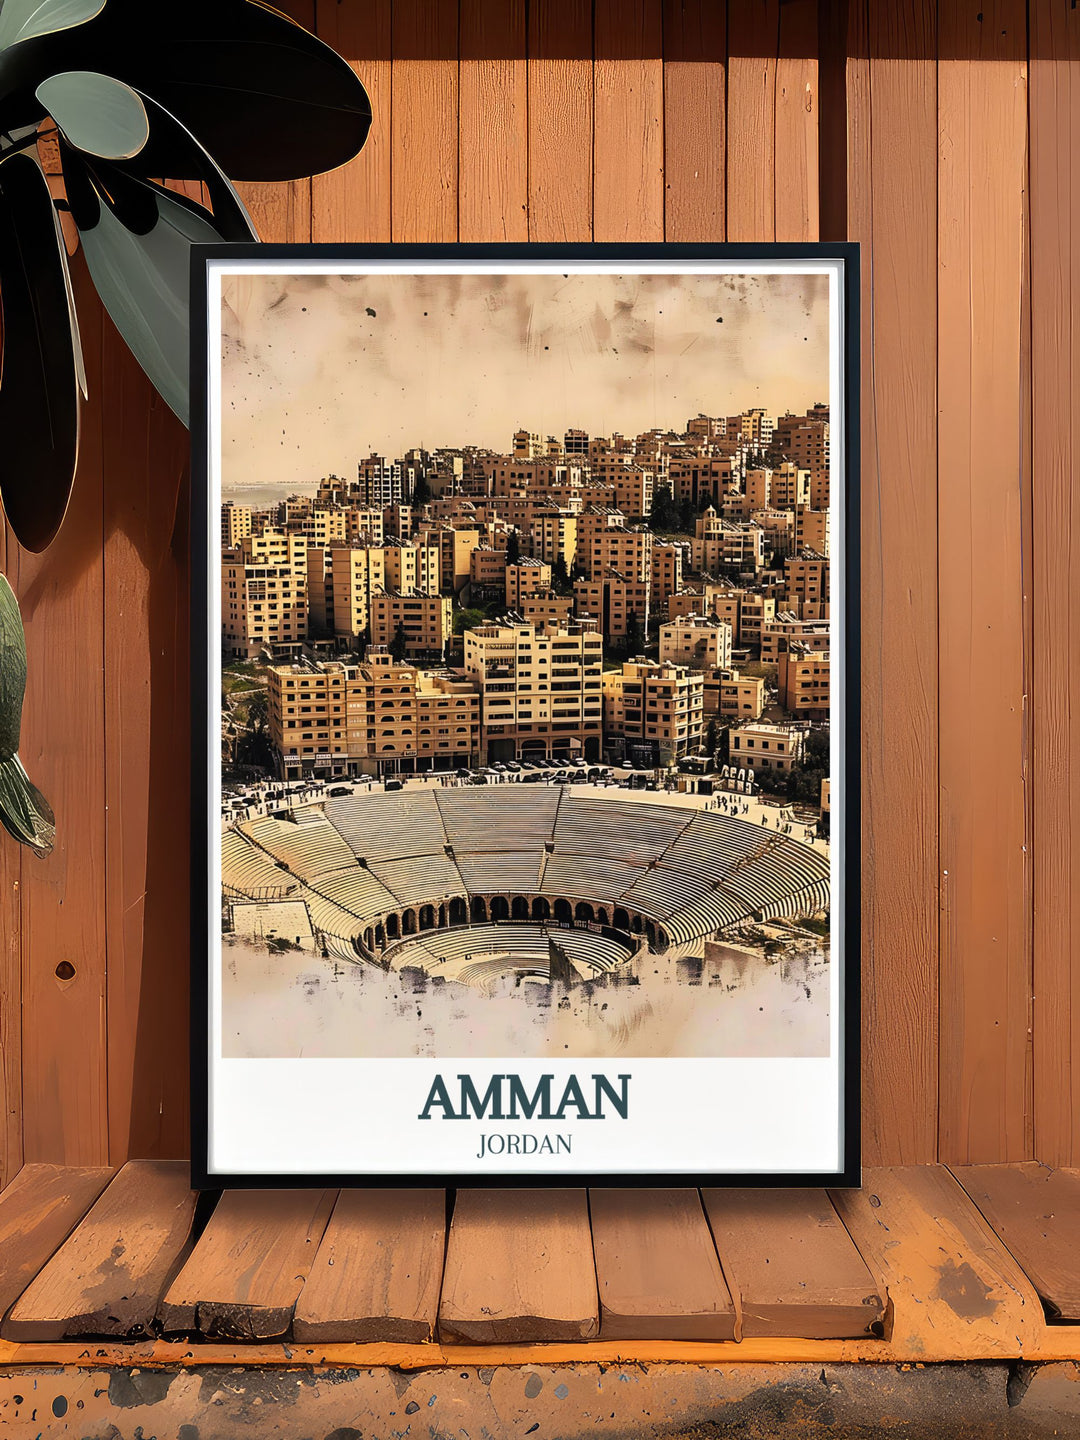 Unique Amman Wall Art featuring the Roman Ampitheater and Jabal Al Jofeh bringing the historical and modern blend of Amman to your living space through exquisite artwork